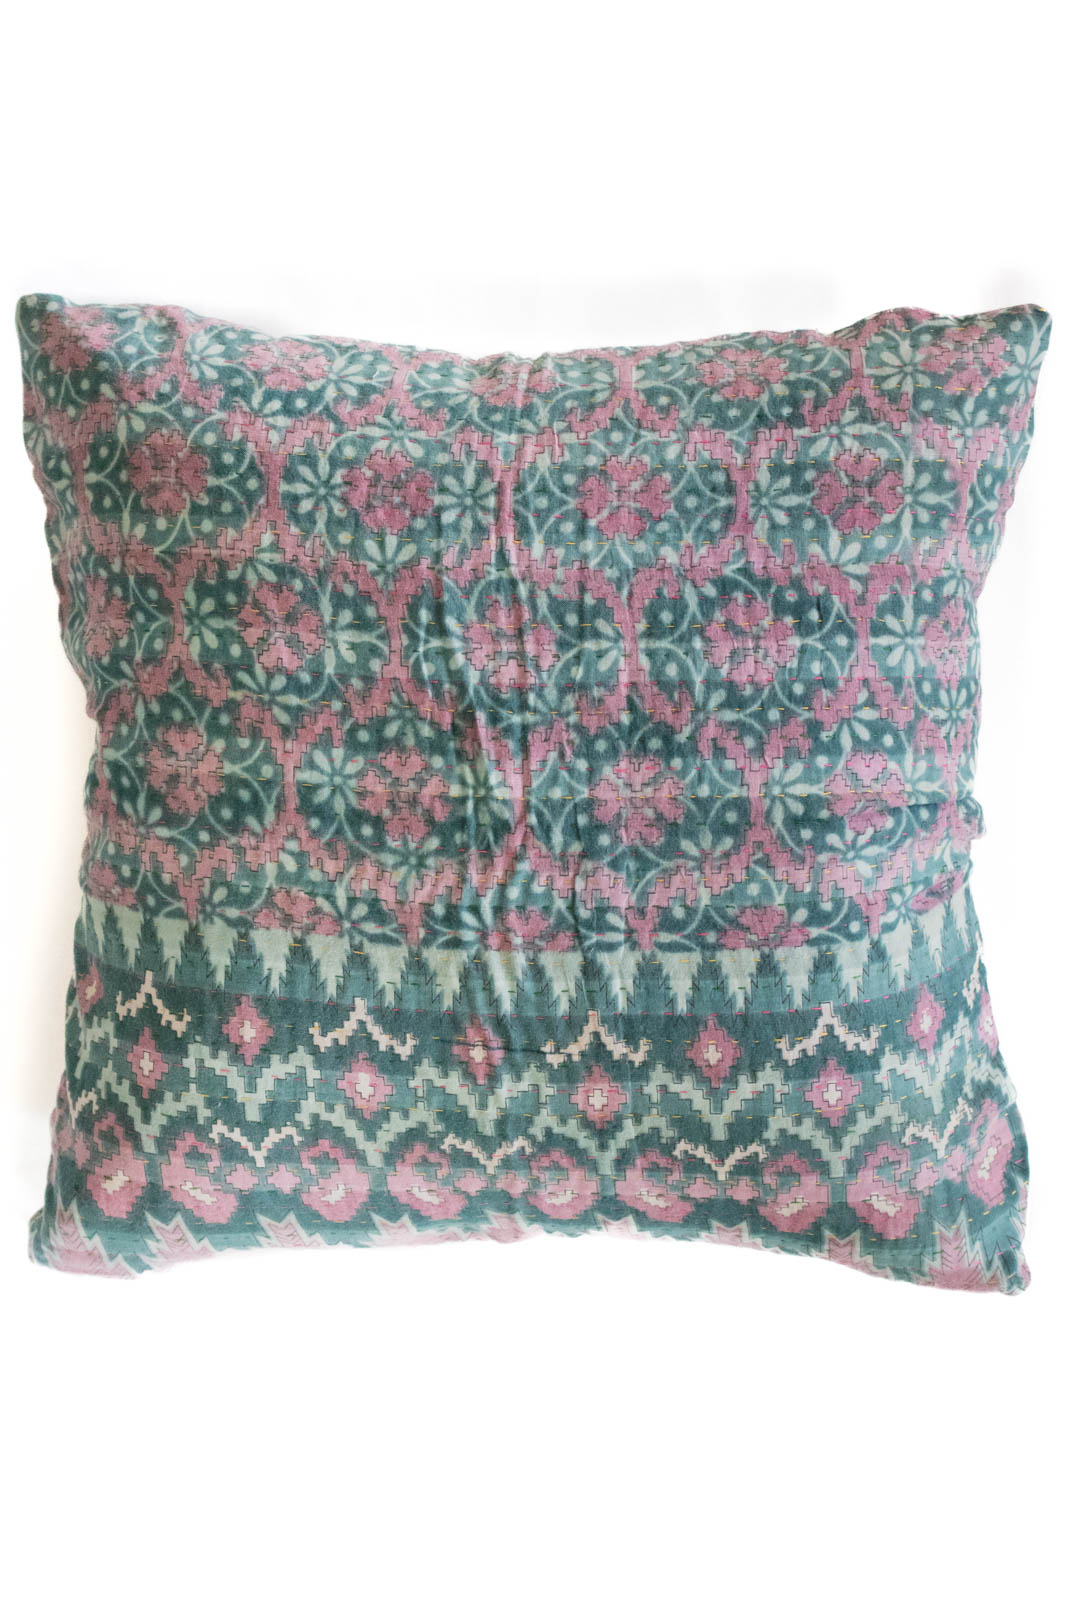 Fearless no. 5 Kantha Pillow Cover